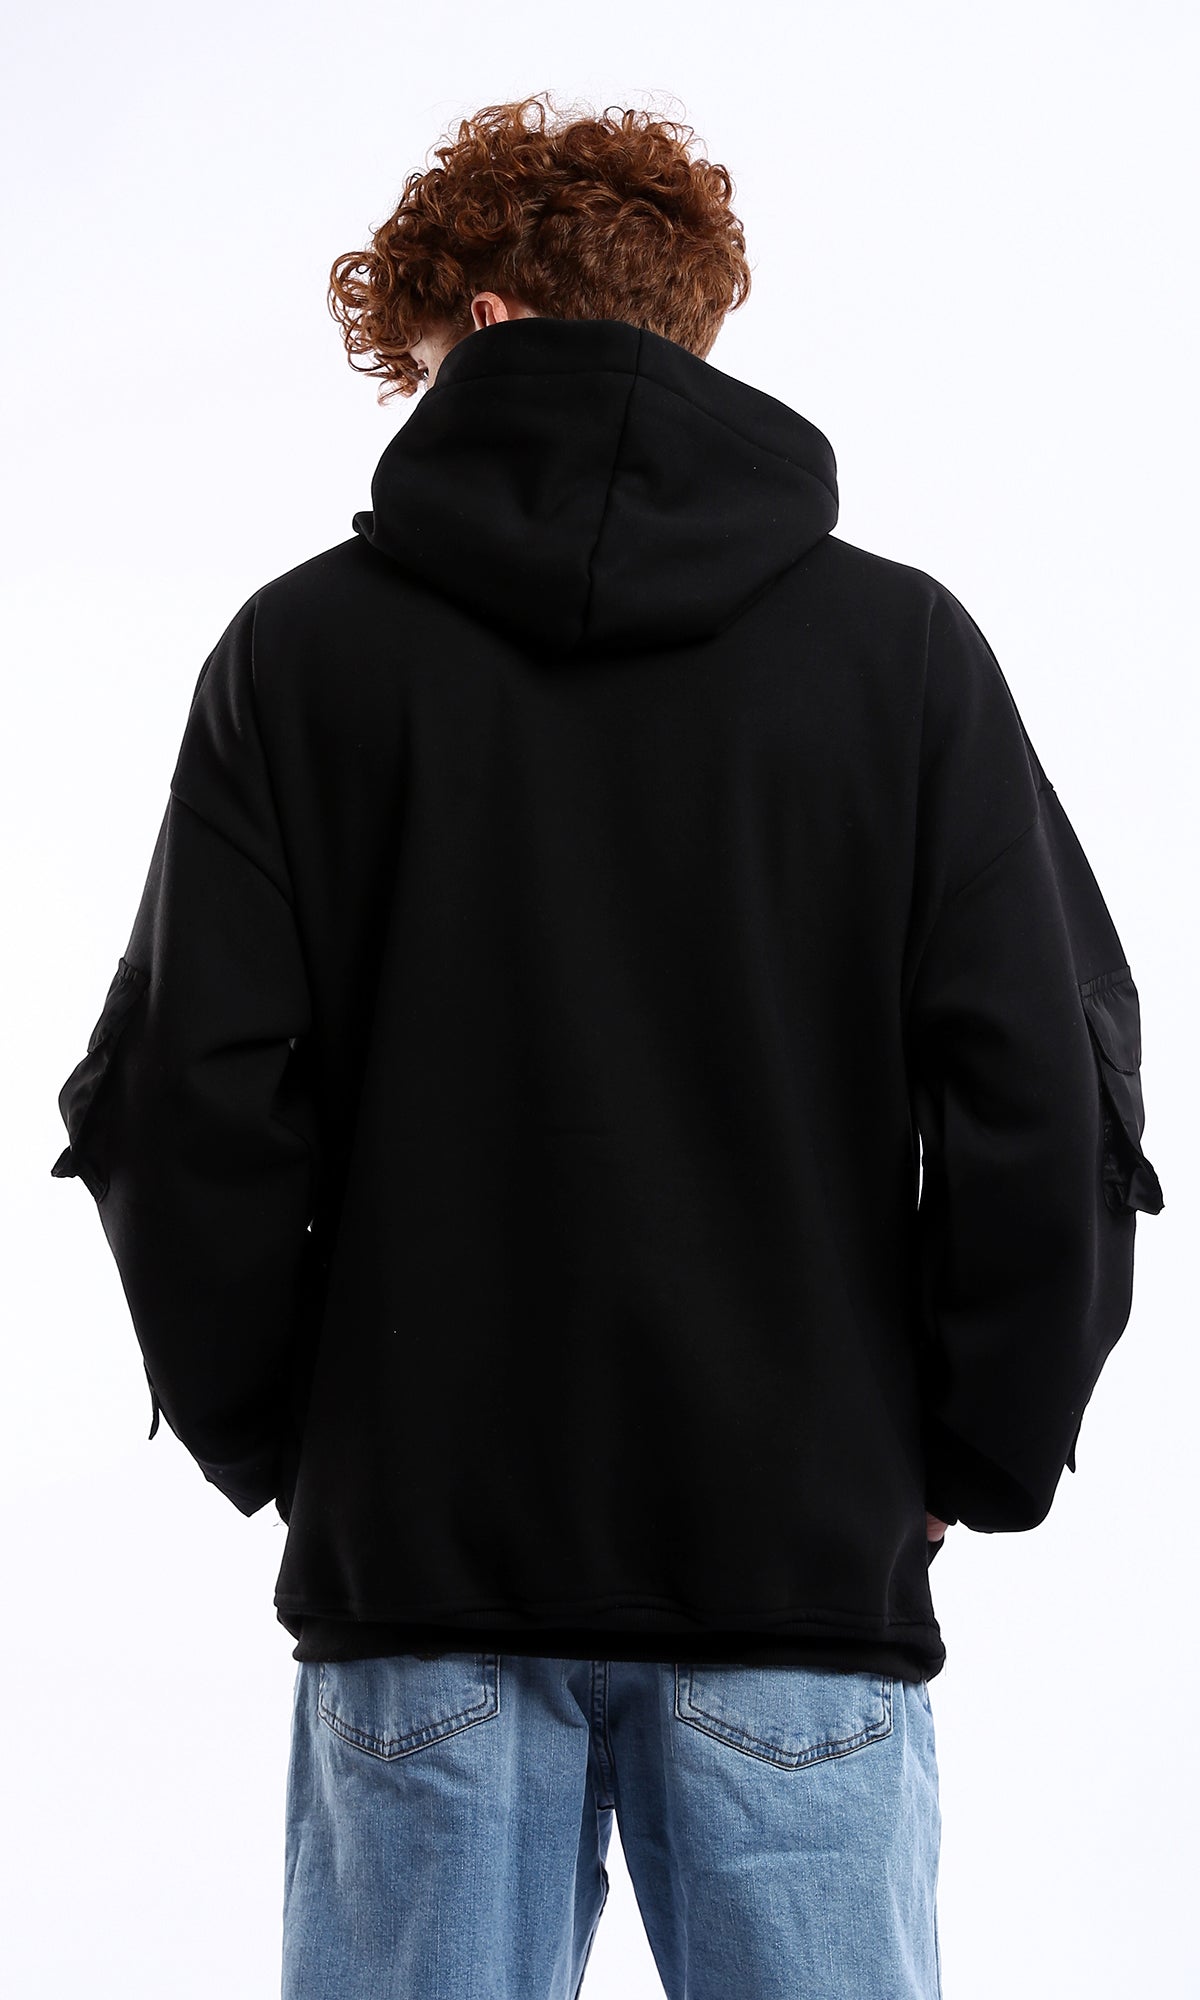 O176714 Black Solid Hoodie With Waterproof Patched Pockets